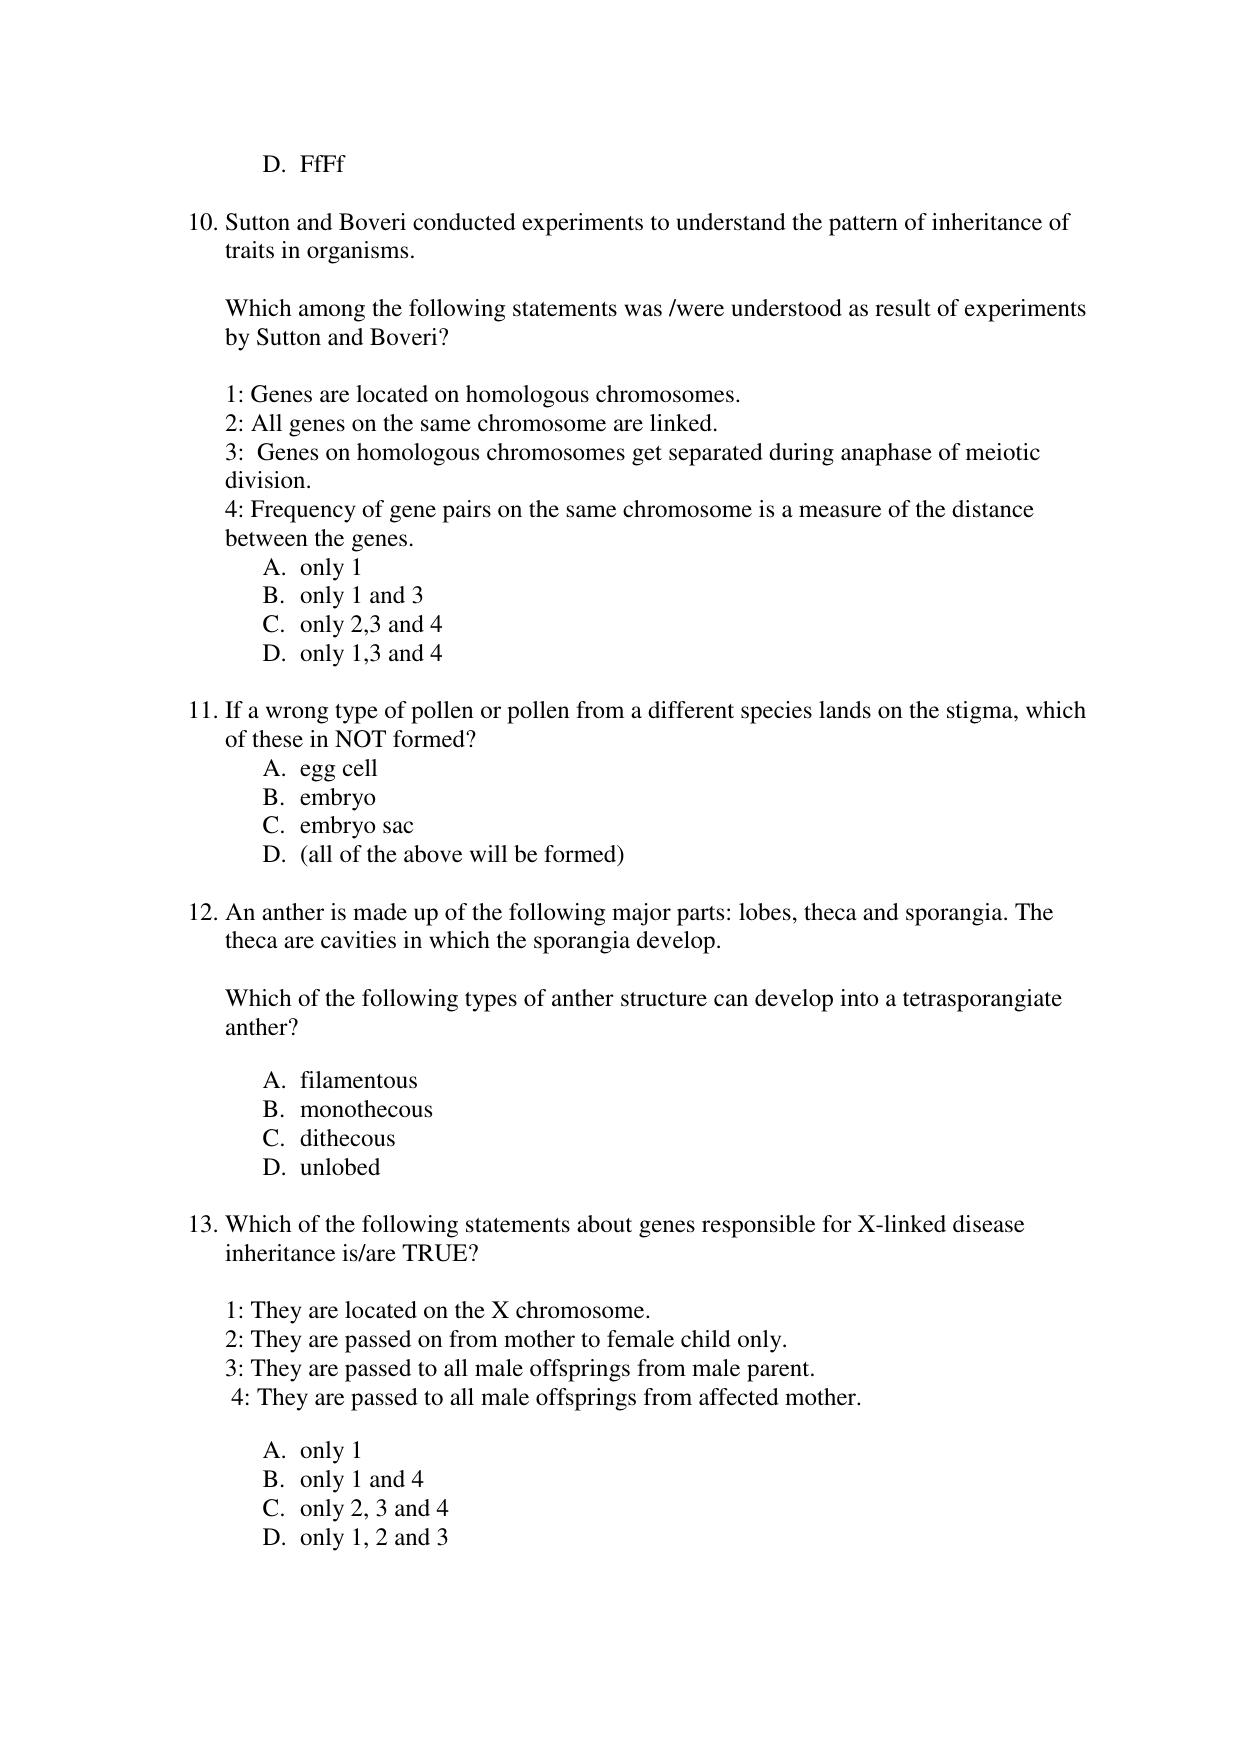 CBSE Class 12 Biology Term 1 Practice Questions 2021-22 - Page 4